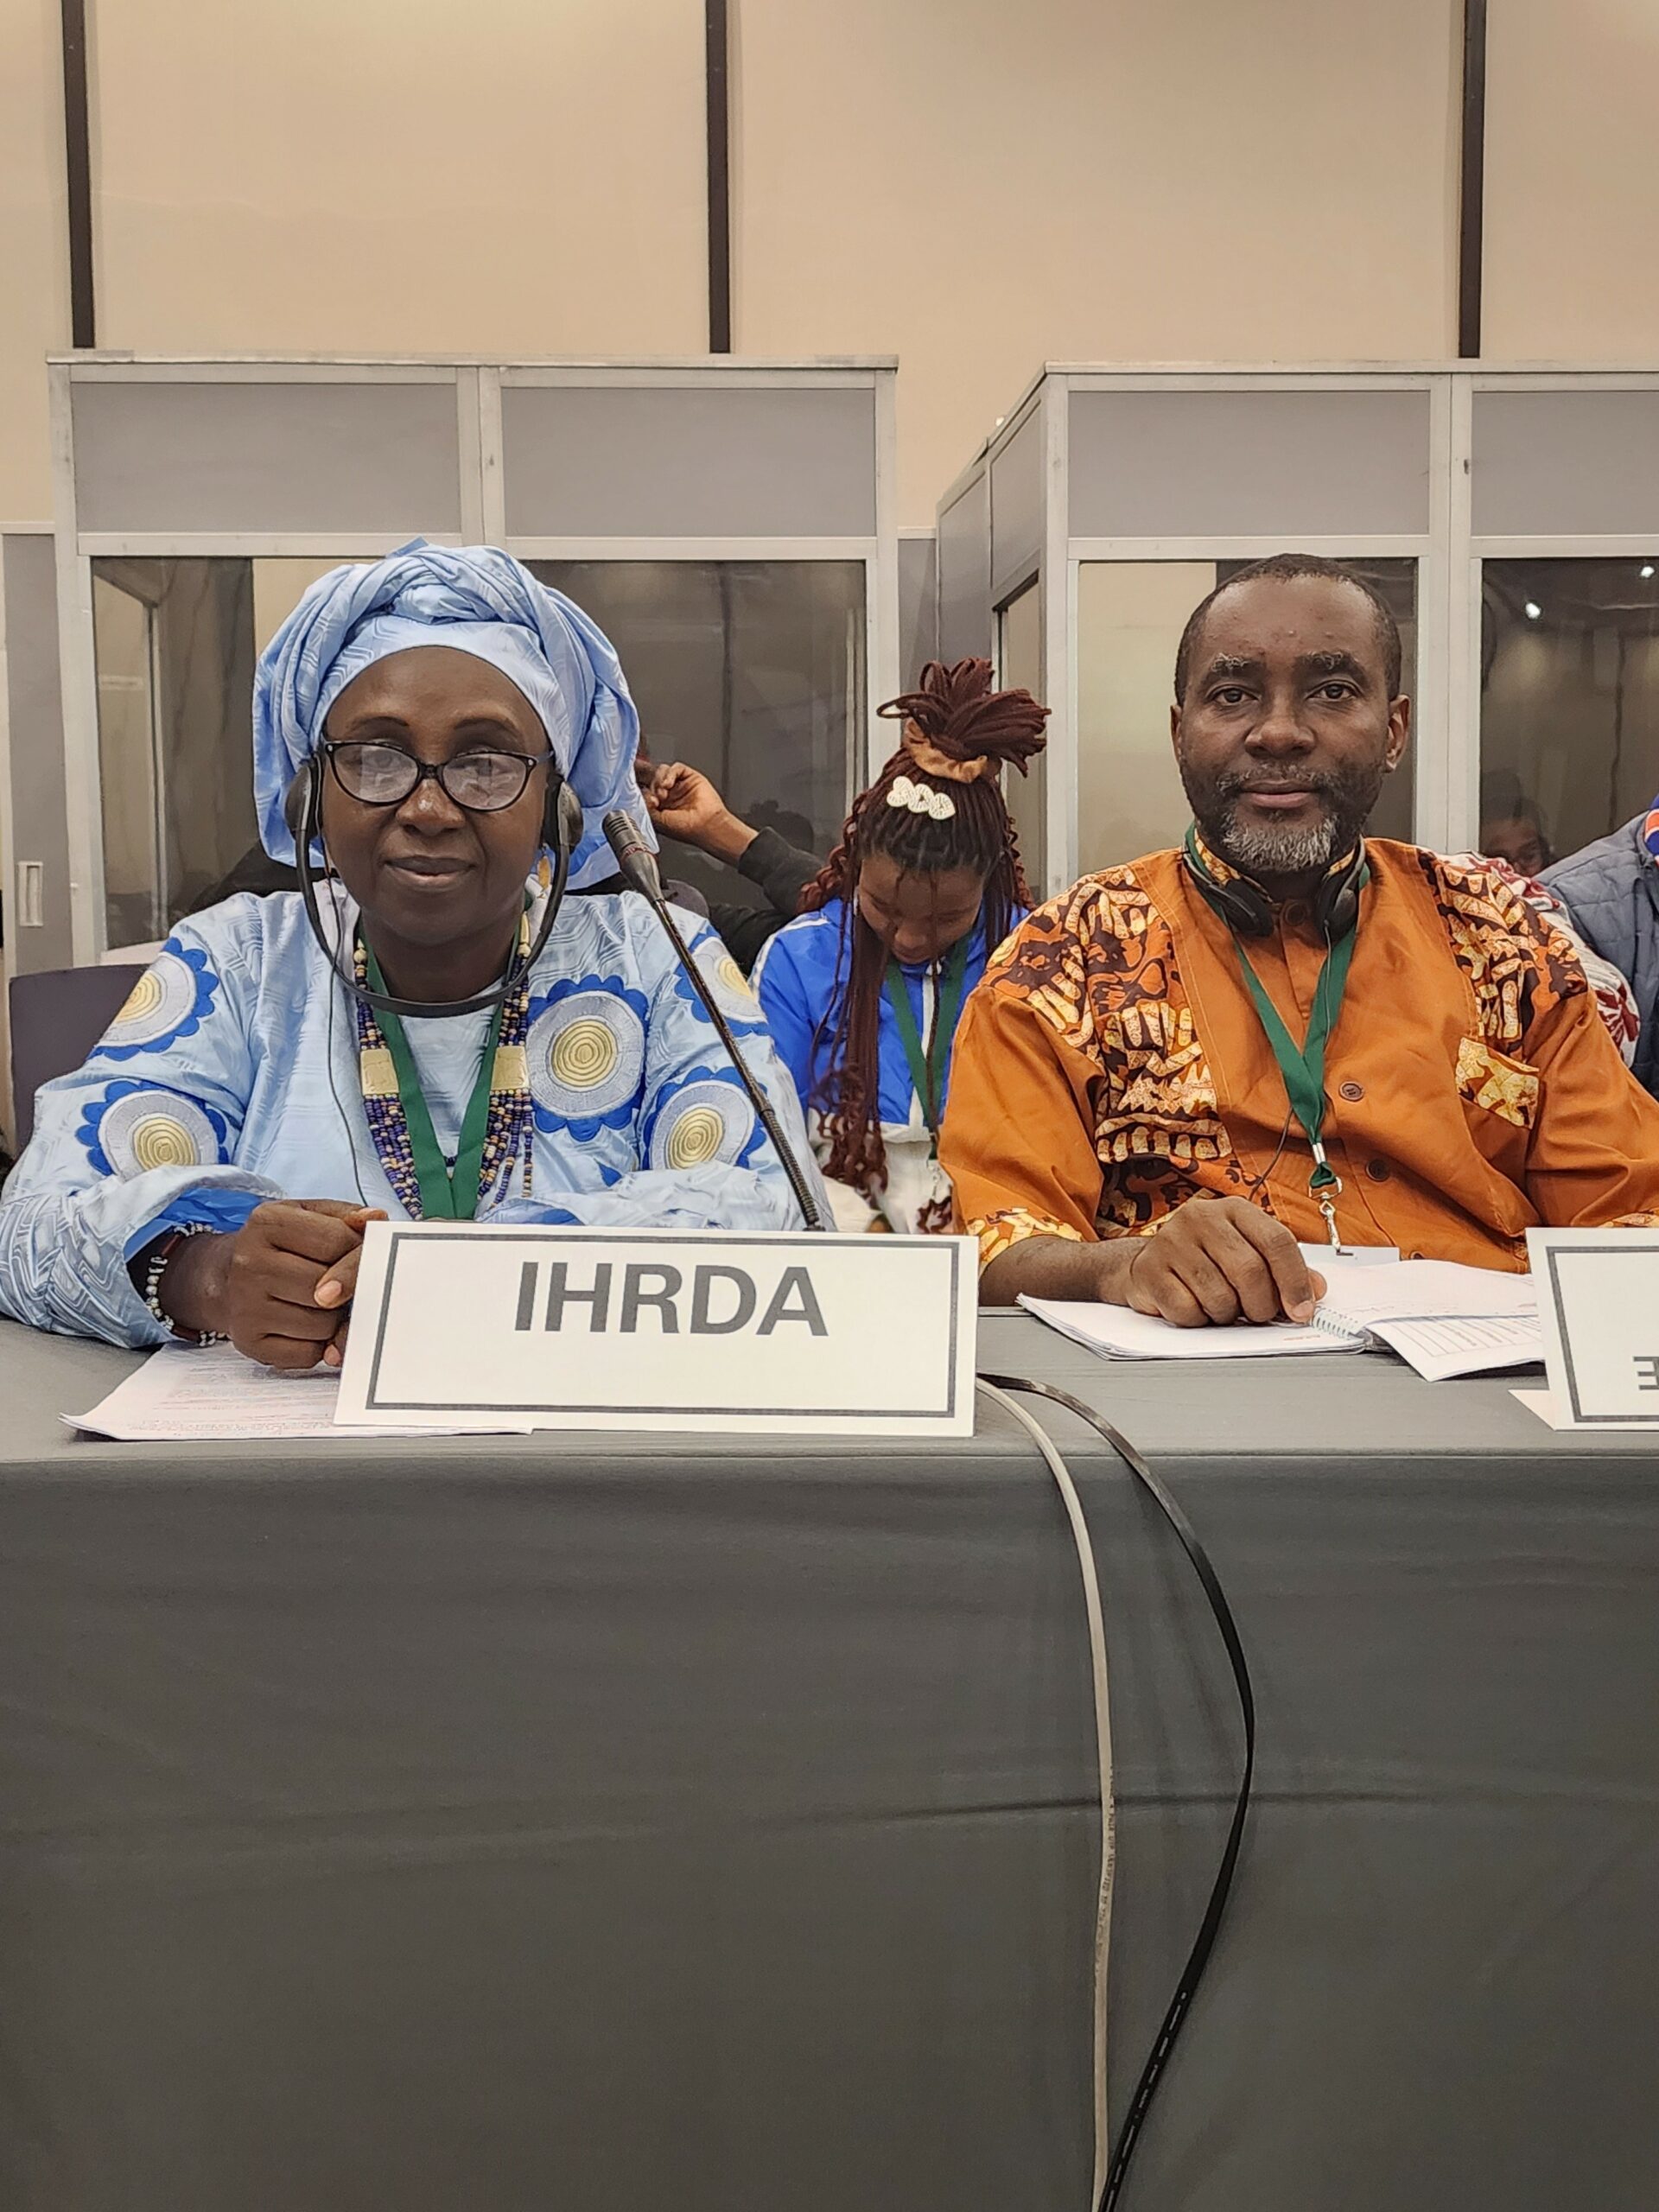 ACERWC 43rd OS: IHRDA statement on child marriage and FGM in Mali